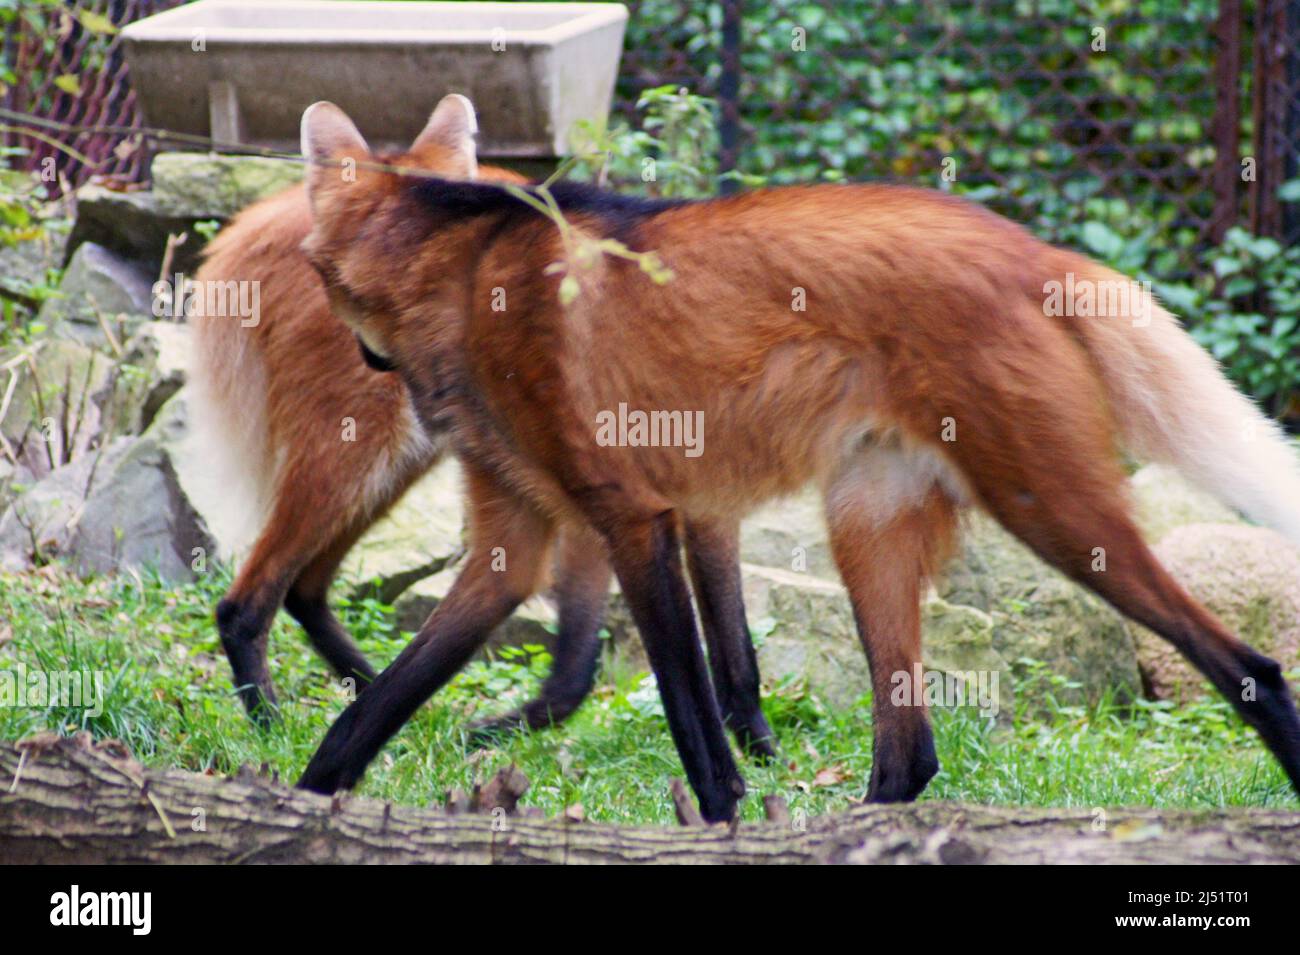 Dances wolves.The wolves dance because they move lateral ambling gait. The Maned wolf is an unusual intermediate species between the wolf and the fox. Stock Photo